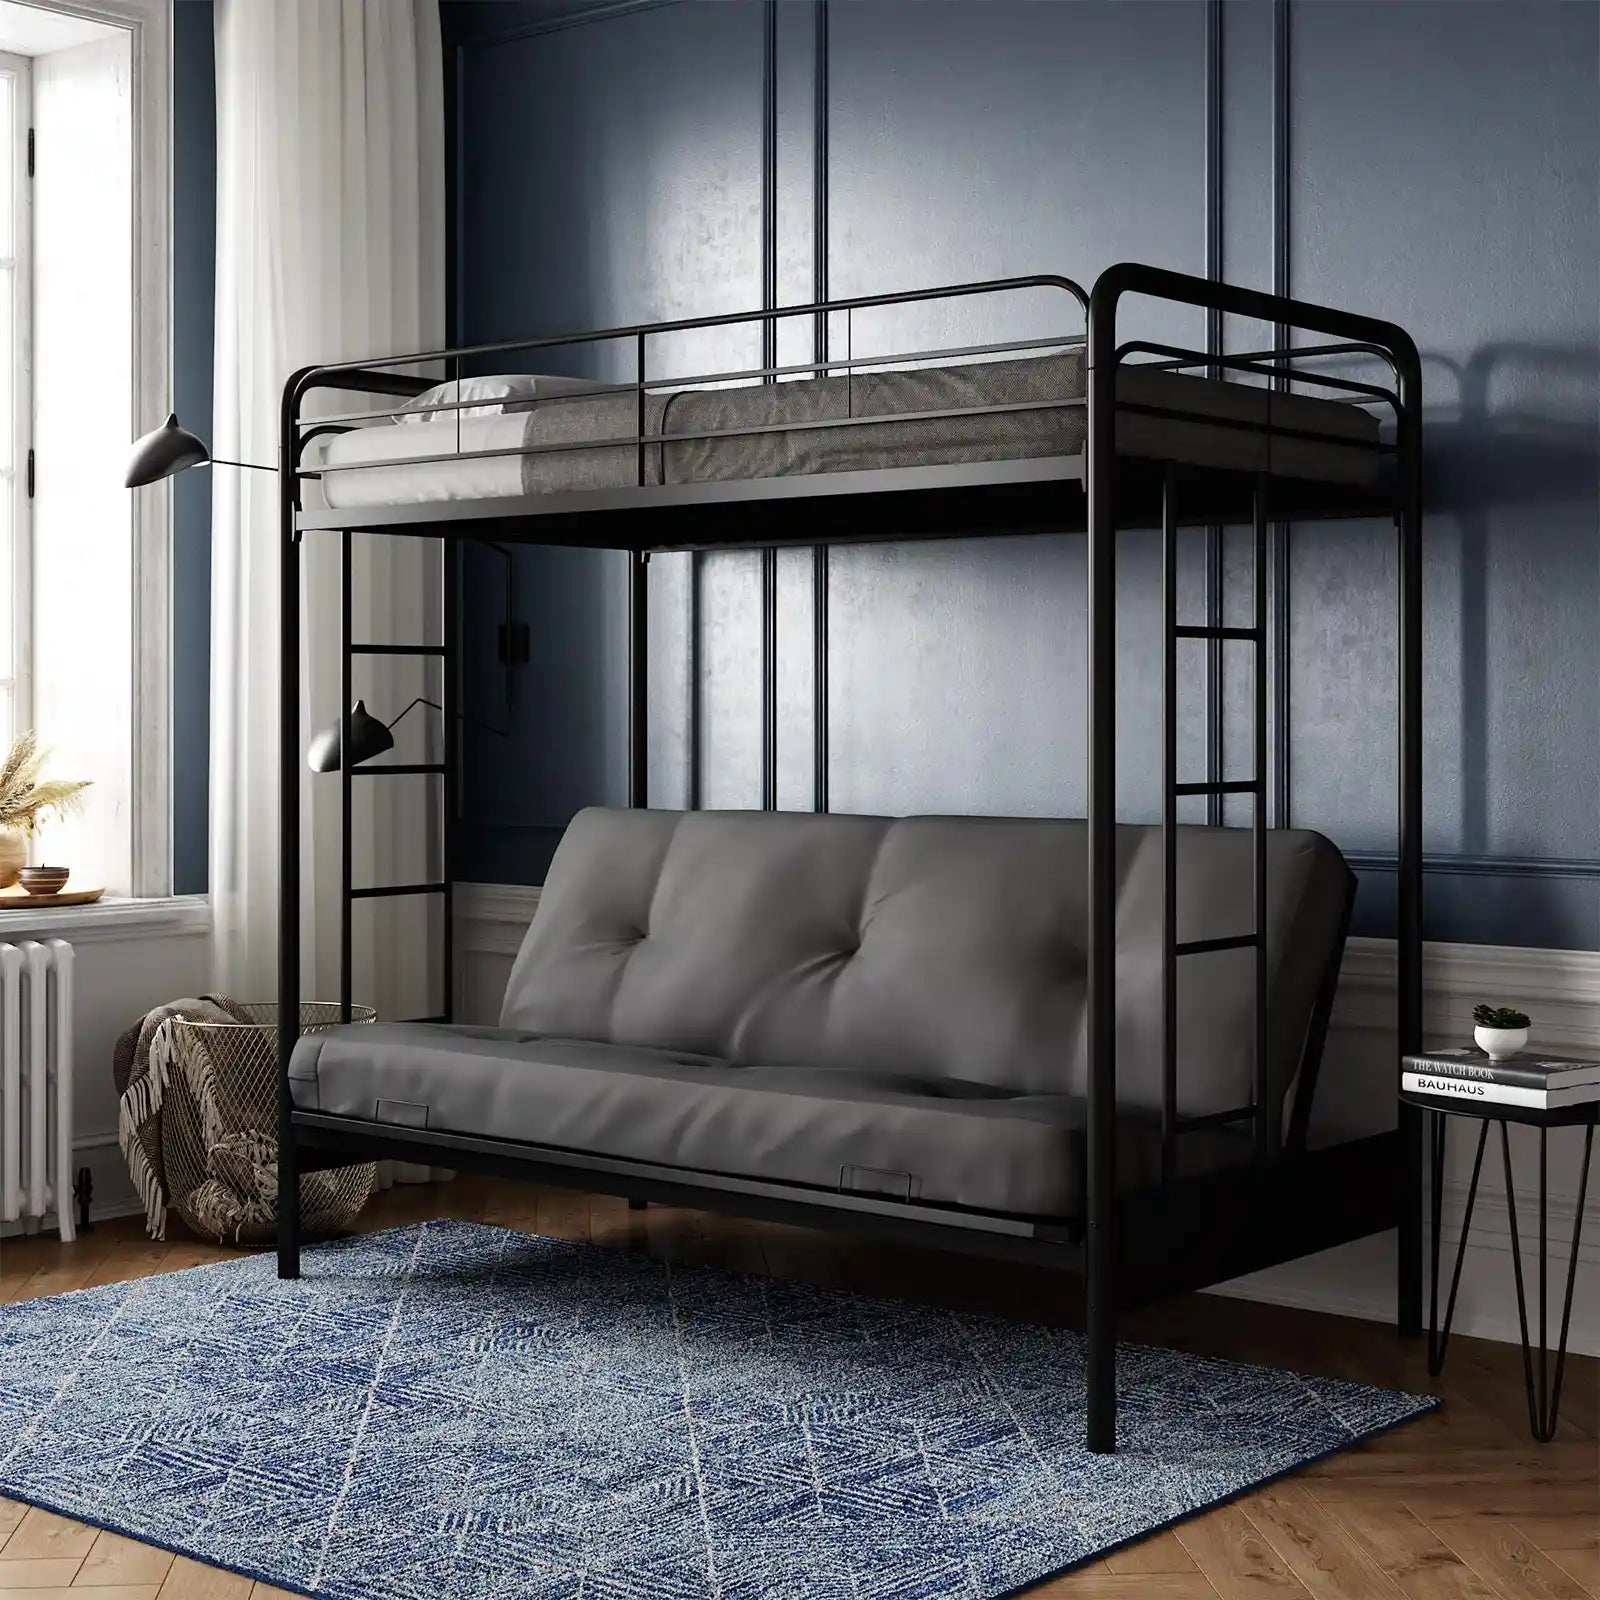 Twin over Futon Metal Bunk Bed